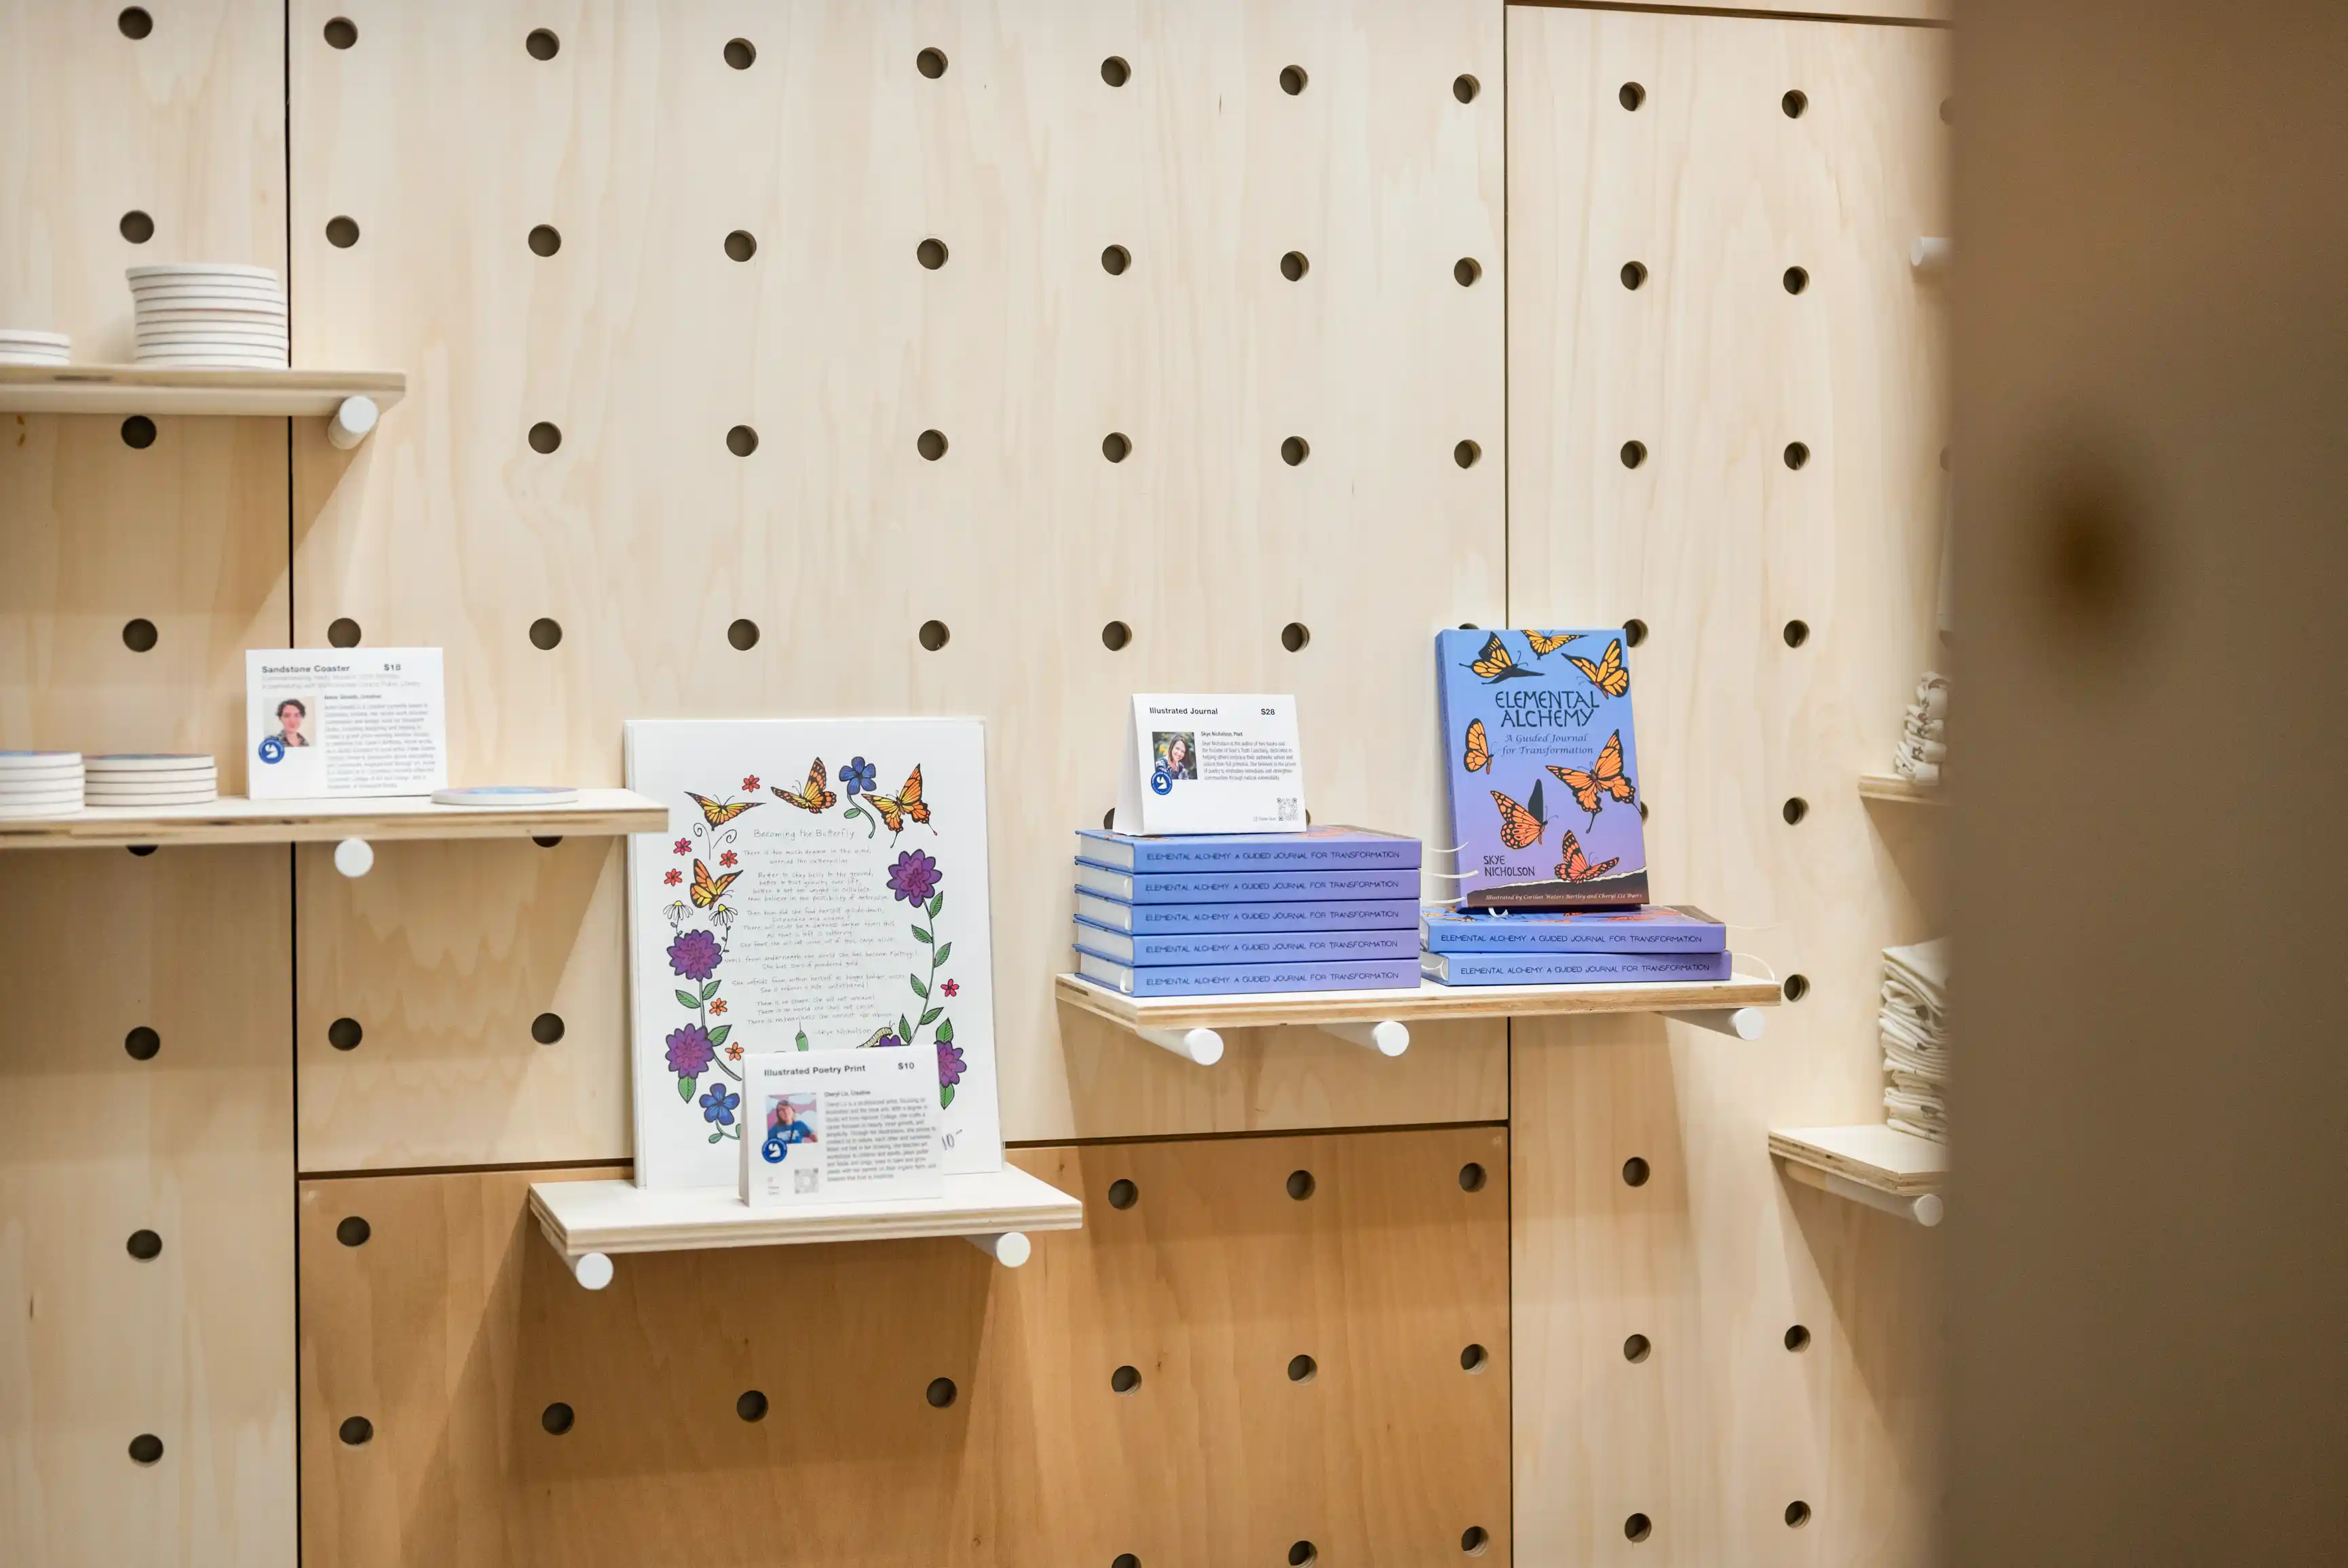 Books and informational cards displayed on wooden shelves with a pegboard wall in the background.